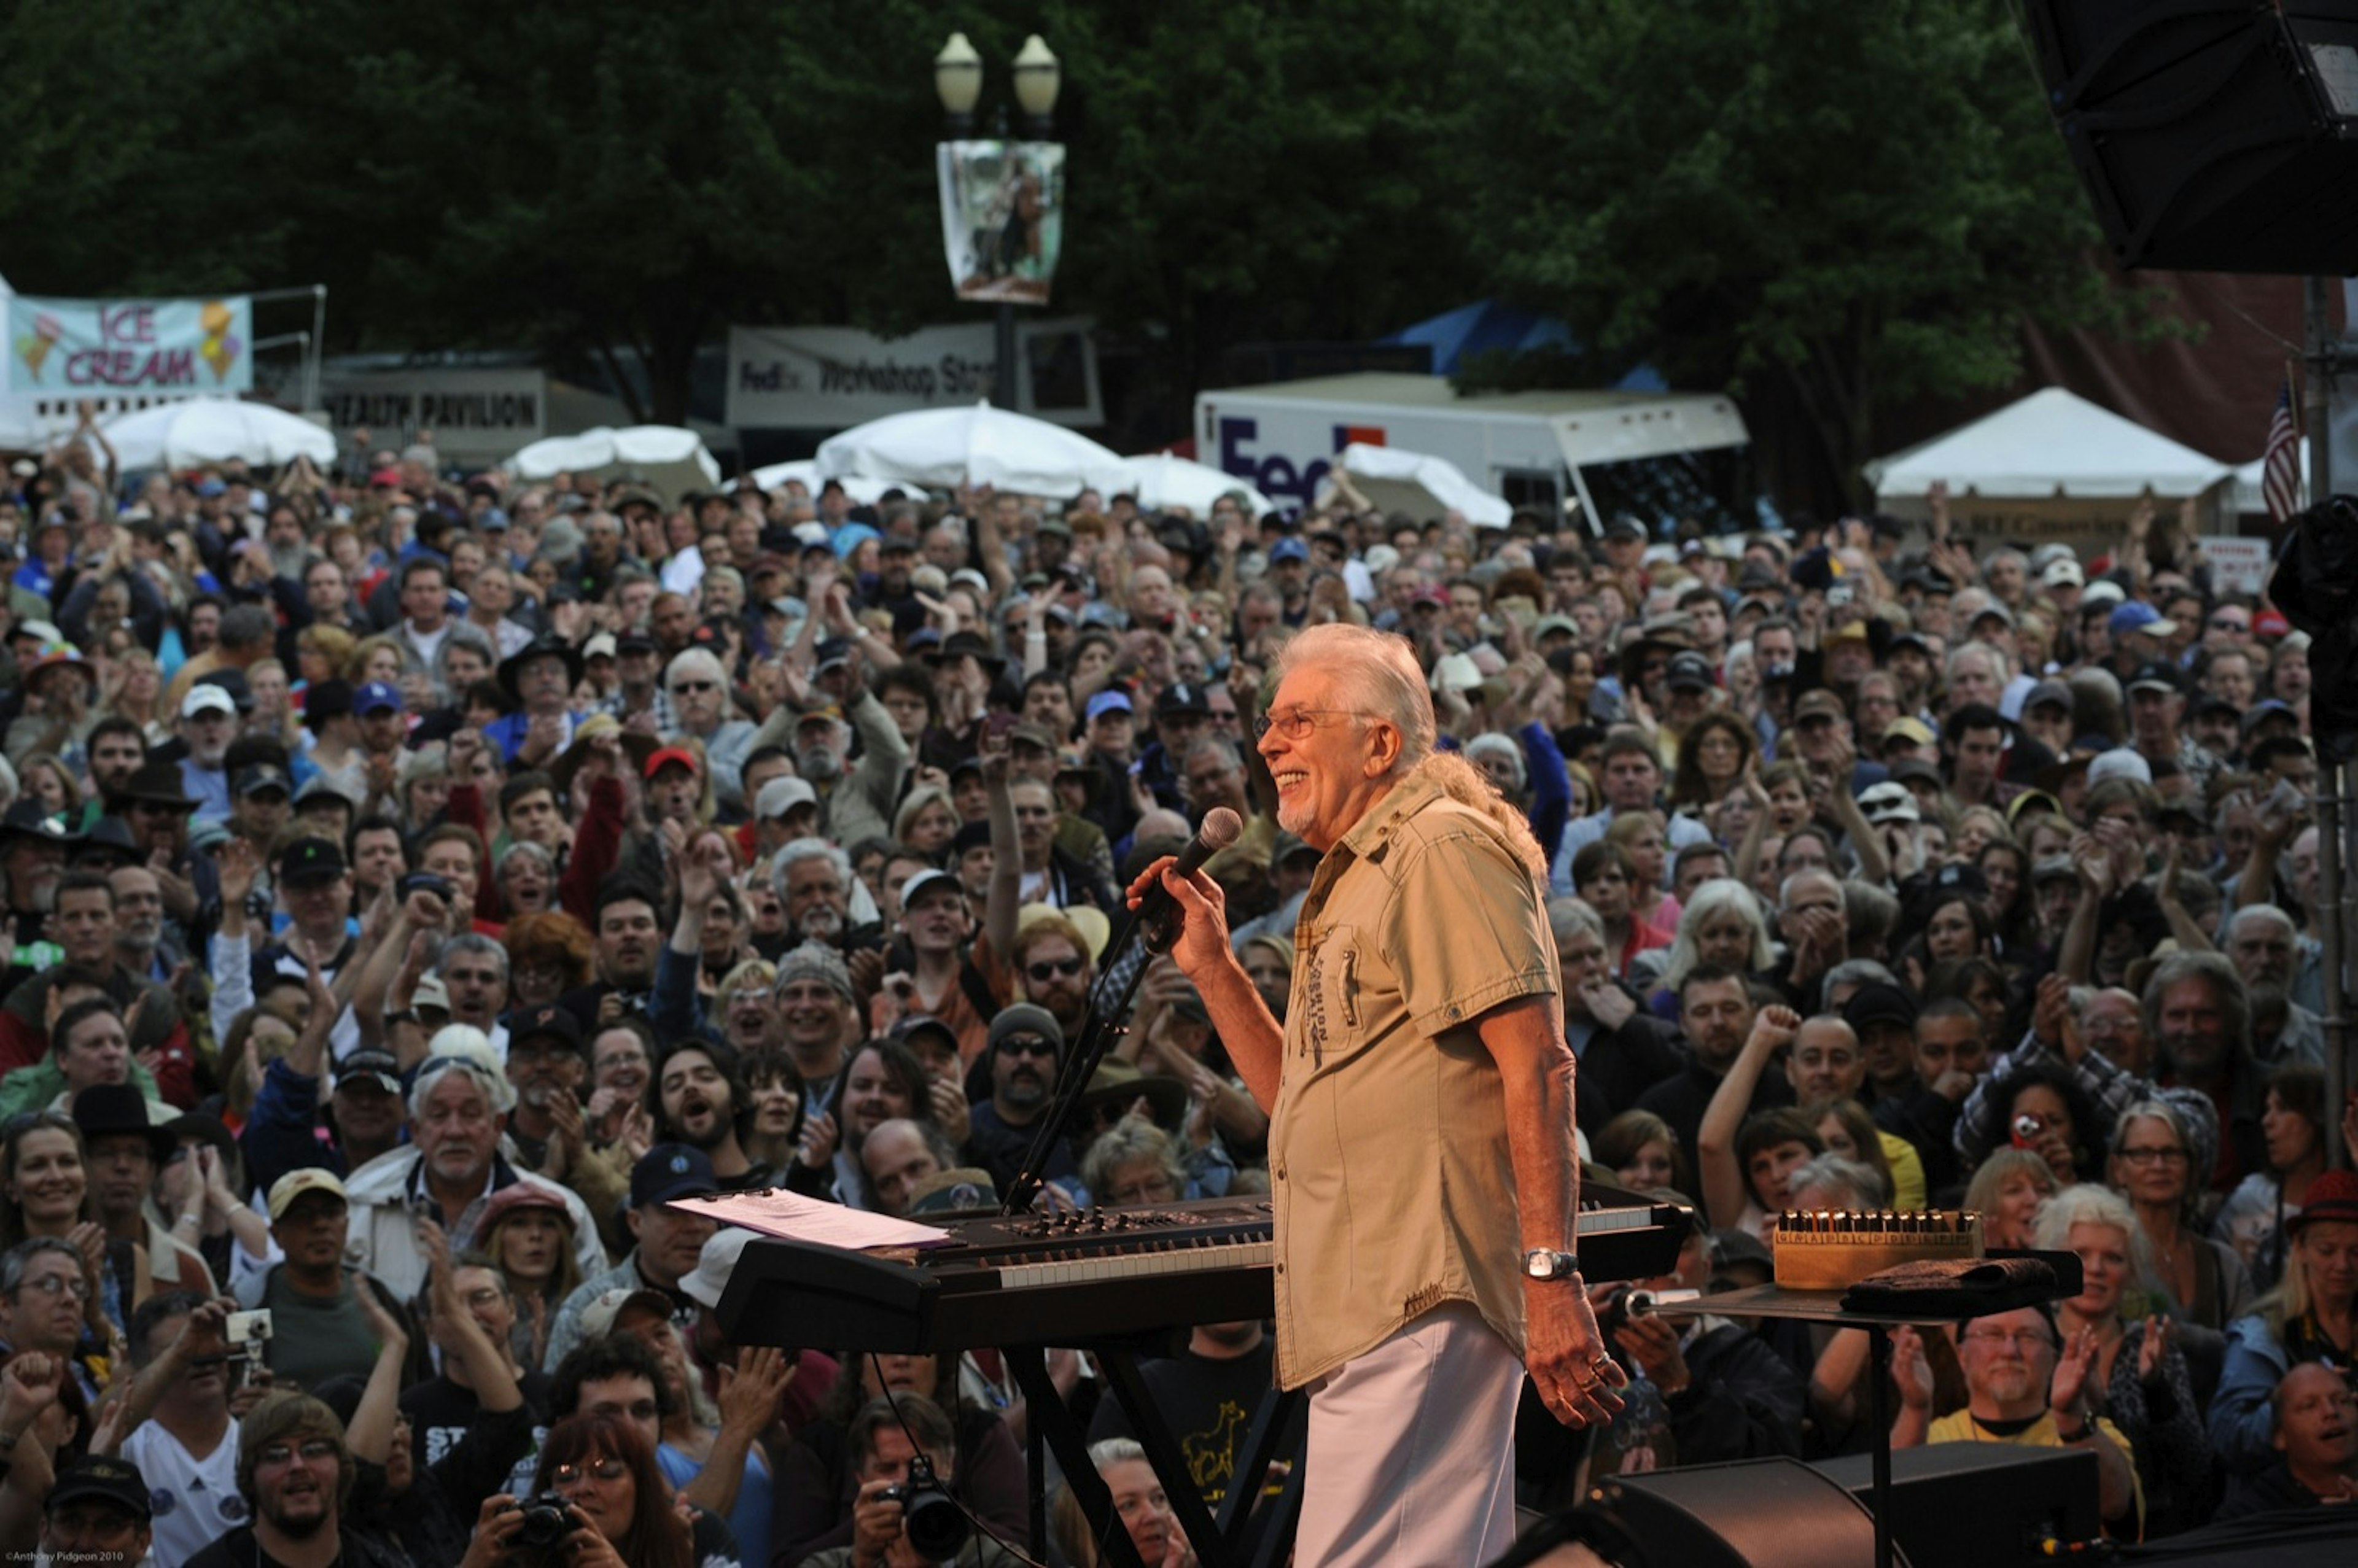 A huge crowd of concertgoers are seen behind a white haired man playing on stage